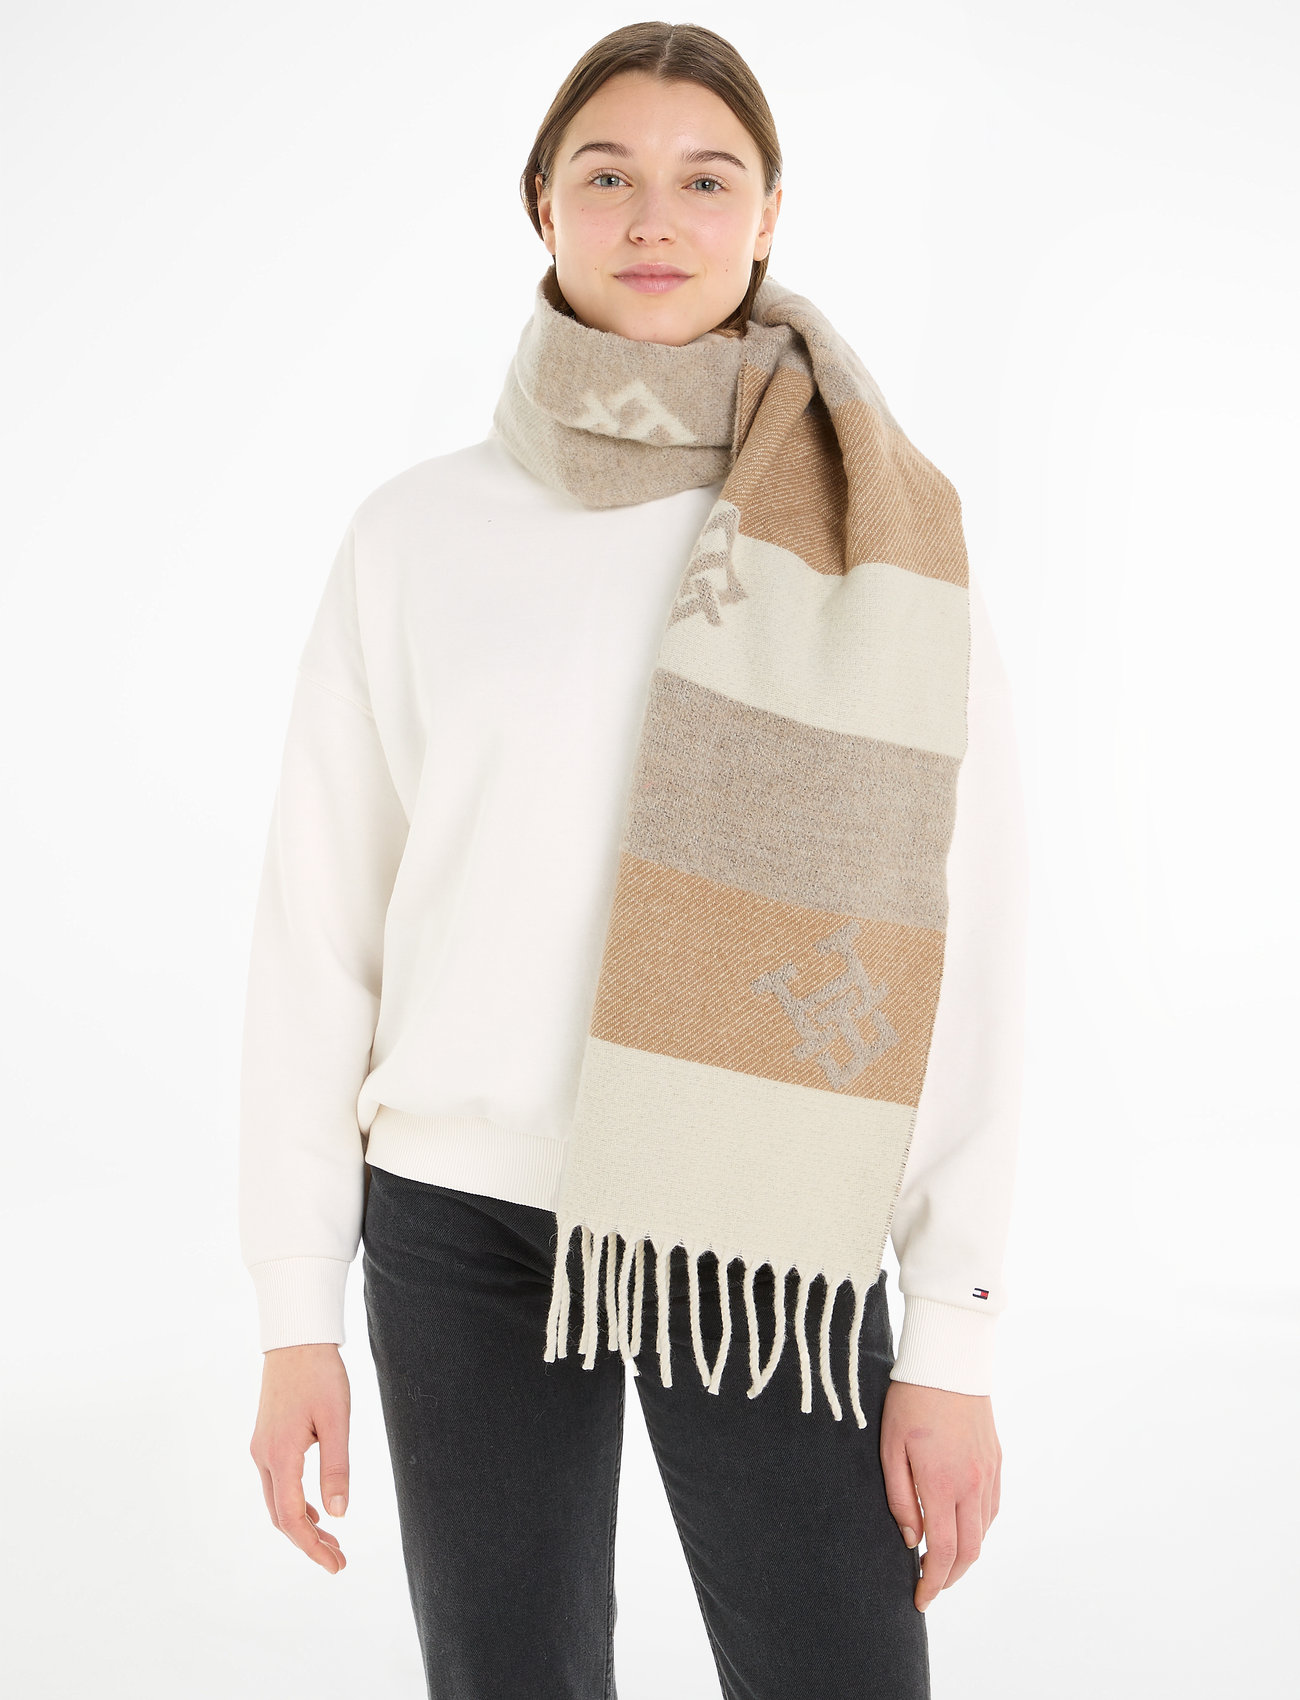 Tommy Hilfiger - LIMITLESS CHIC CB SCARF - winter scarves - cashmere cream mix - 1